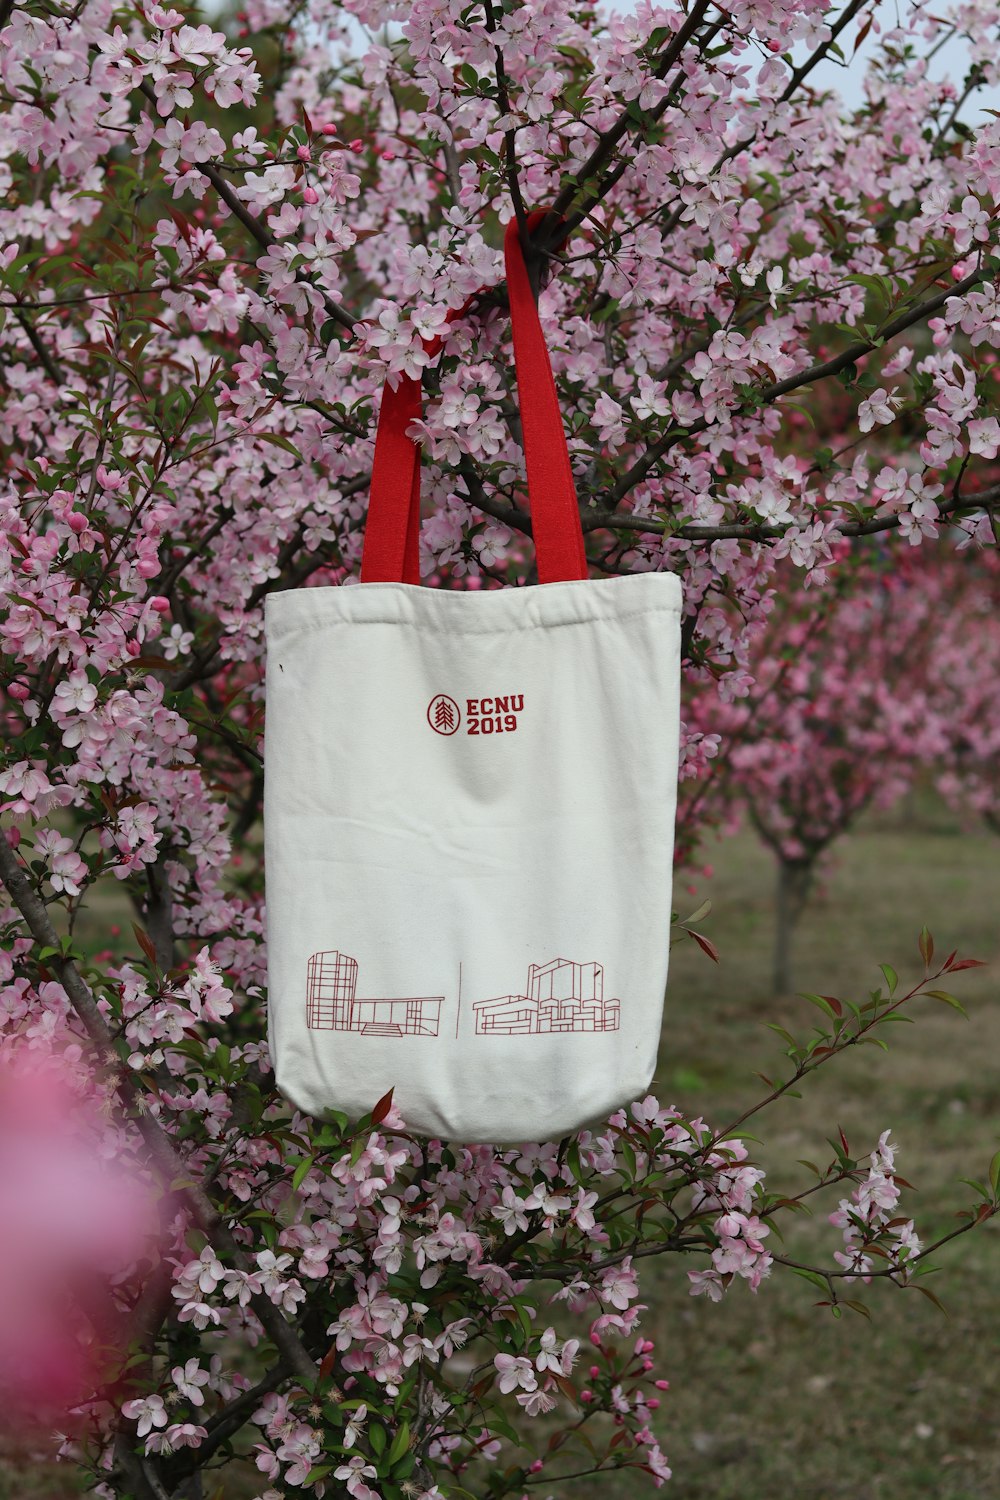 white and red tote bag hanged on red rope